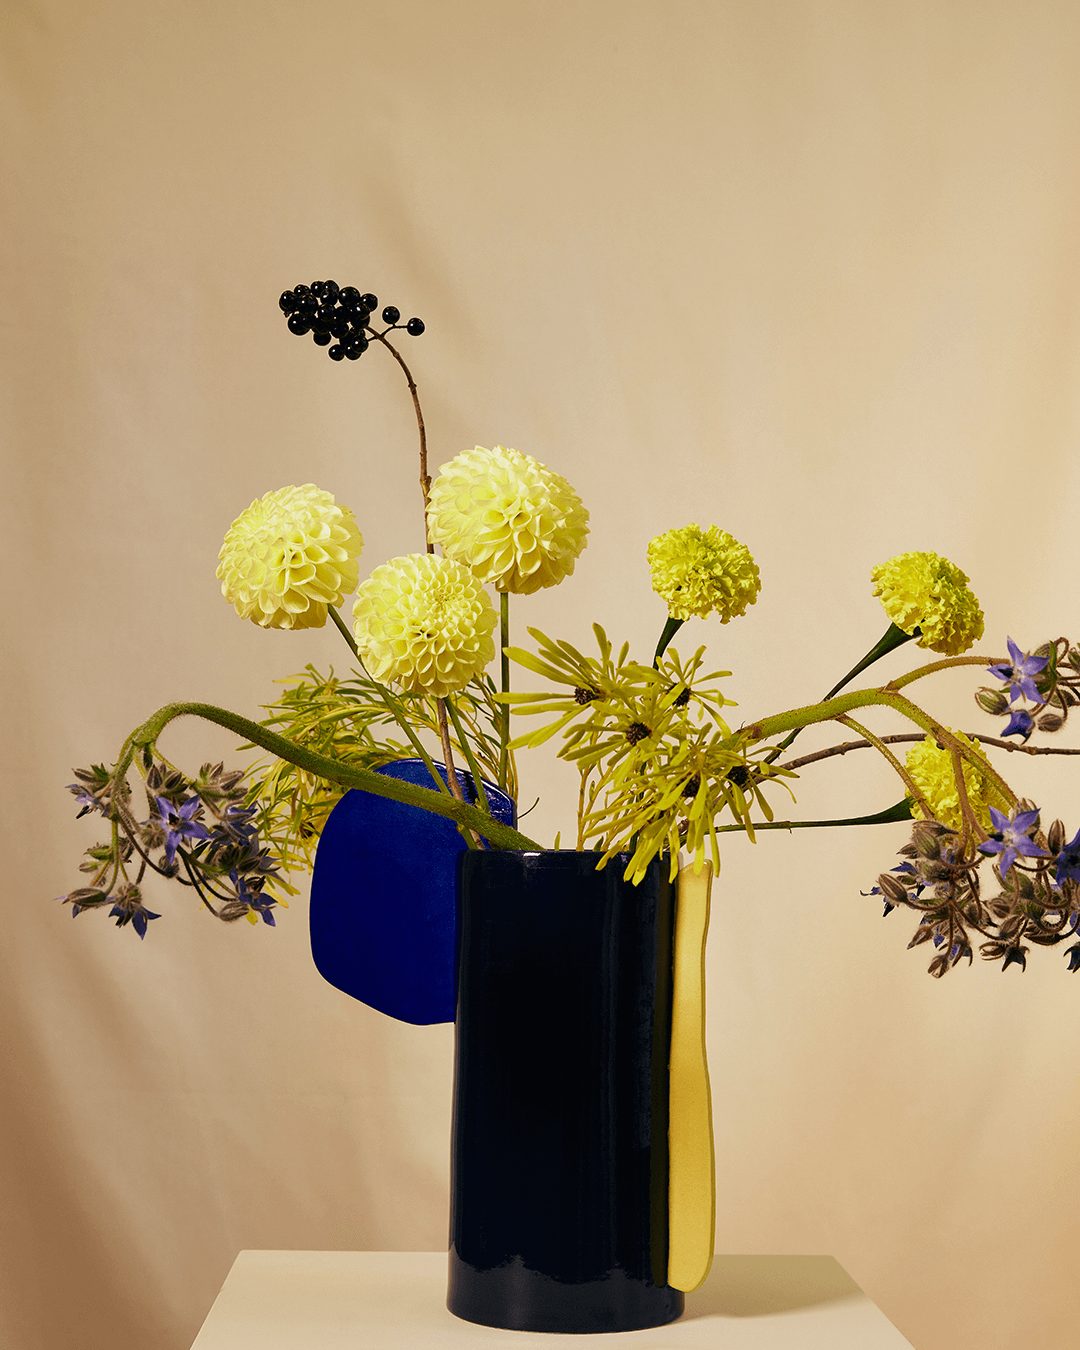 The ALA Vase is a carefully handmade limited edition by Cristina Fagnani Ceramica. The ceramic vase unites a classy body shape with organically formed elements, reminding of a wing, which means "ala“ in Italian. Whether equipped with beautiful flowers or without, this vase is definitely always an eye-catcher. 